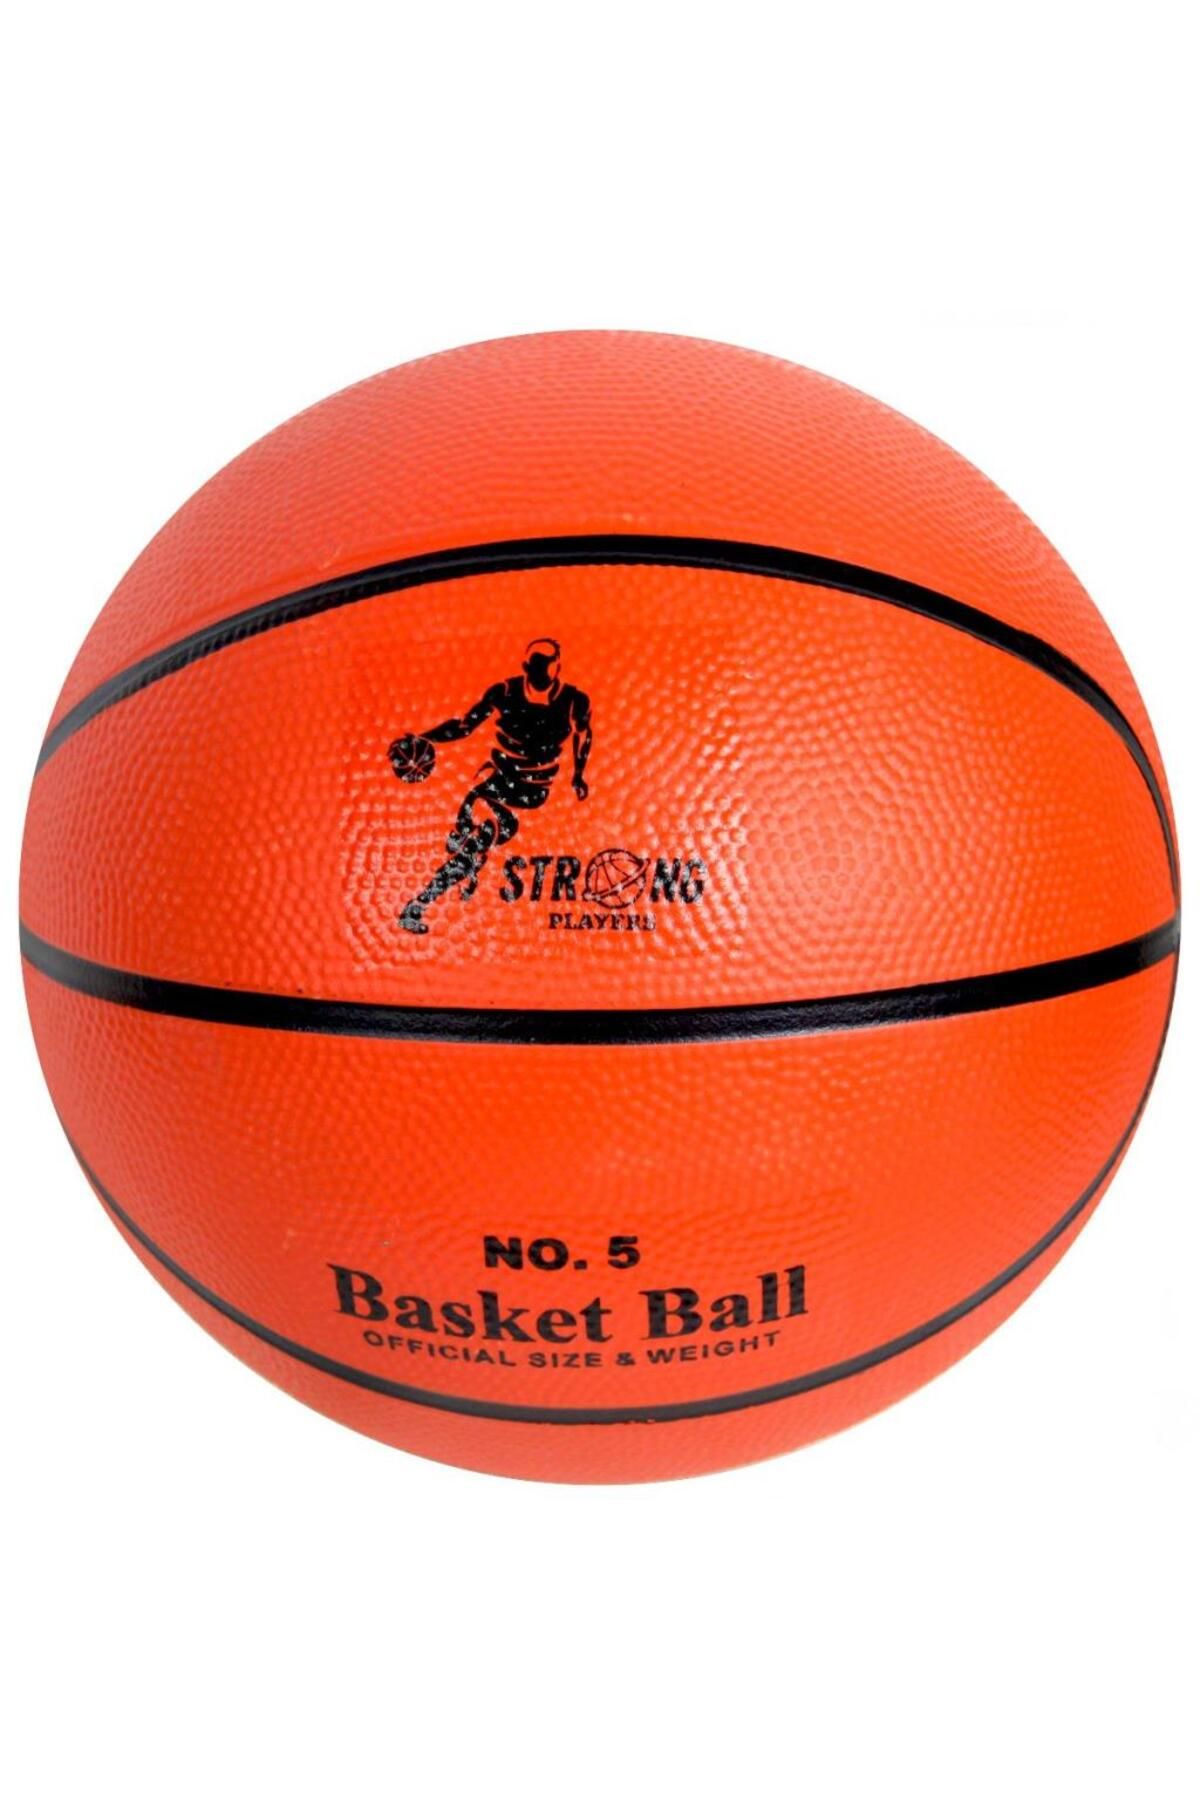 TWOX Nessiworld Strong Basketbol Topu No:5 CSB-005